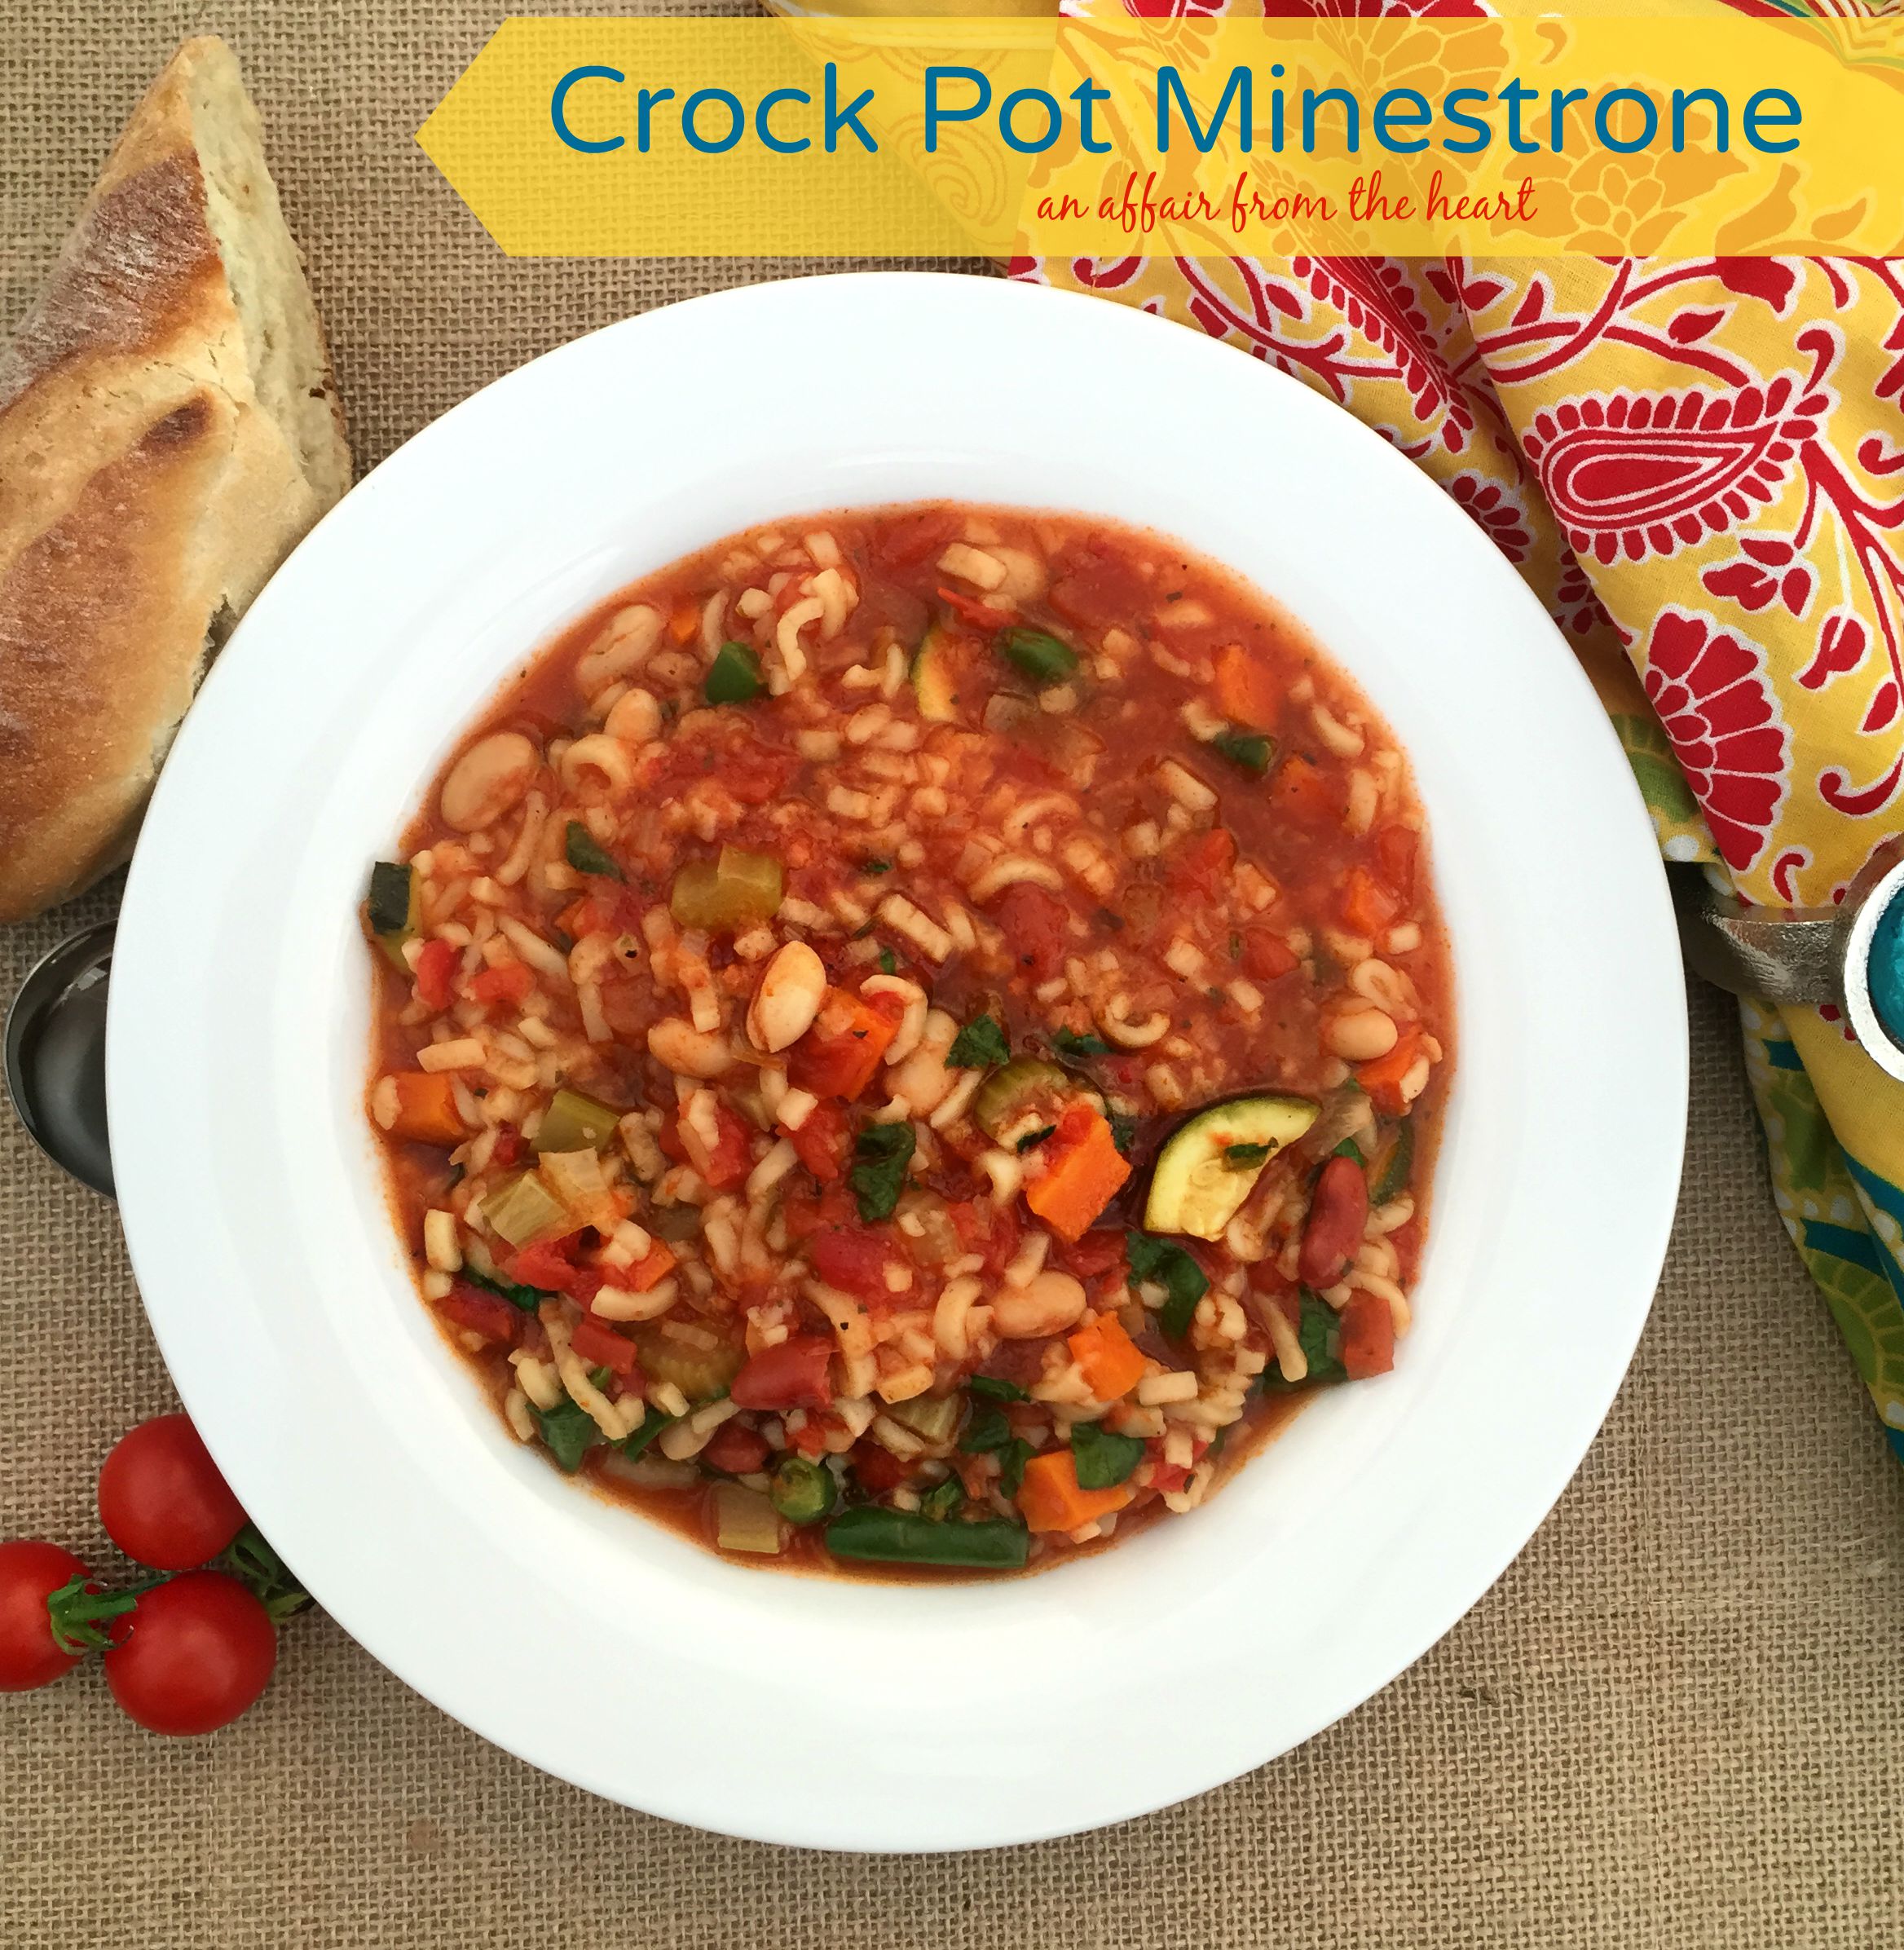 Crock Pot Minestrone #FallForFlavor — Giveaway Included